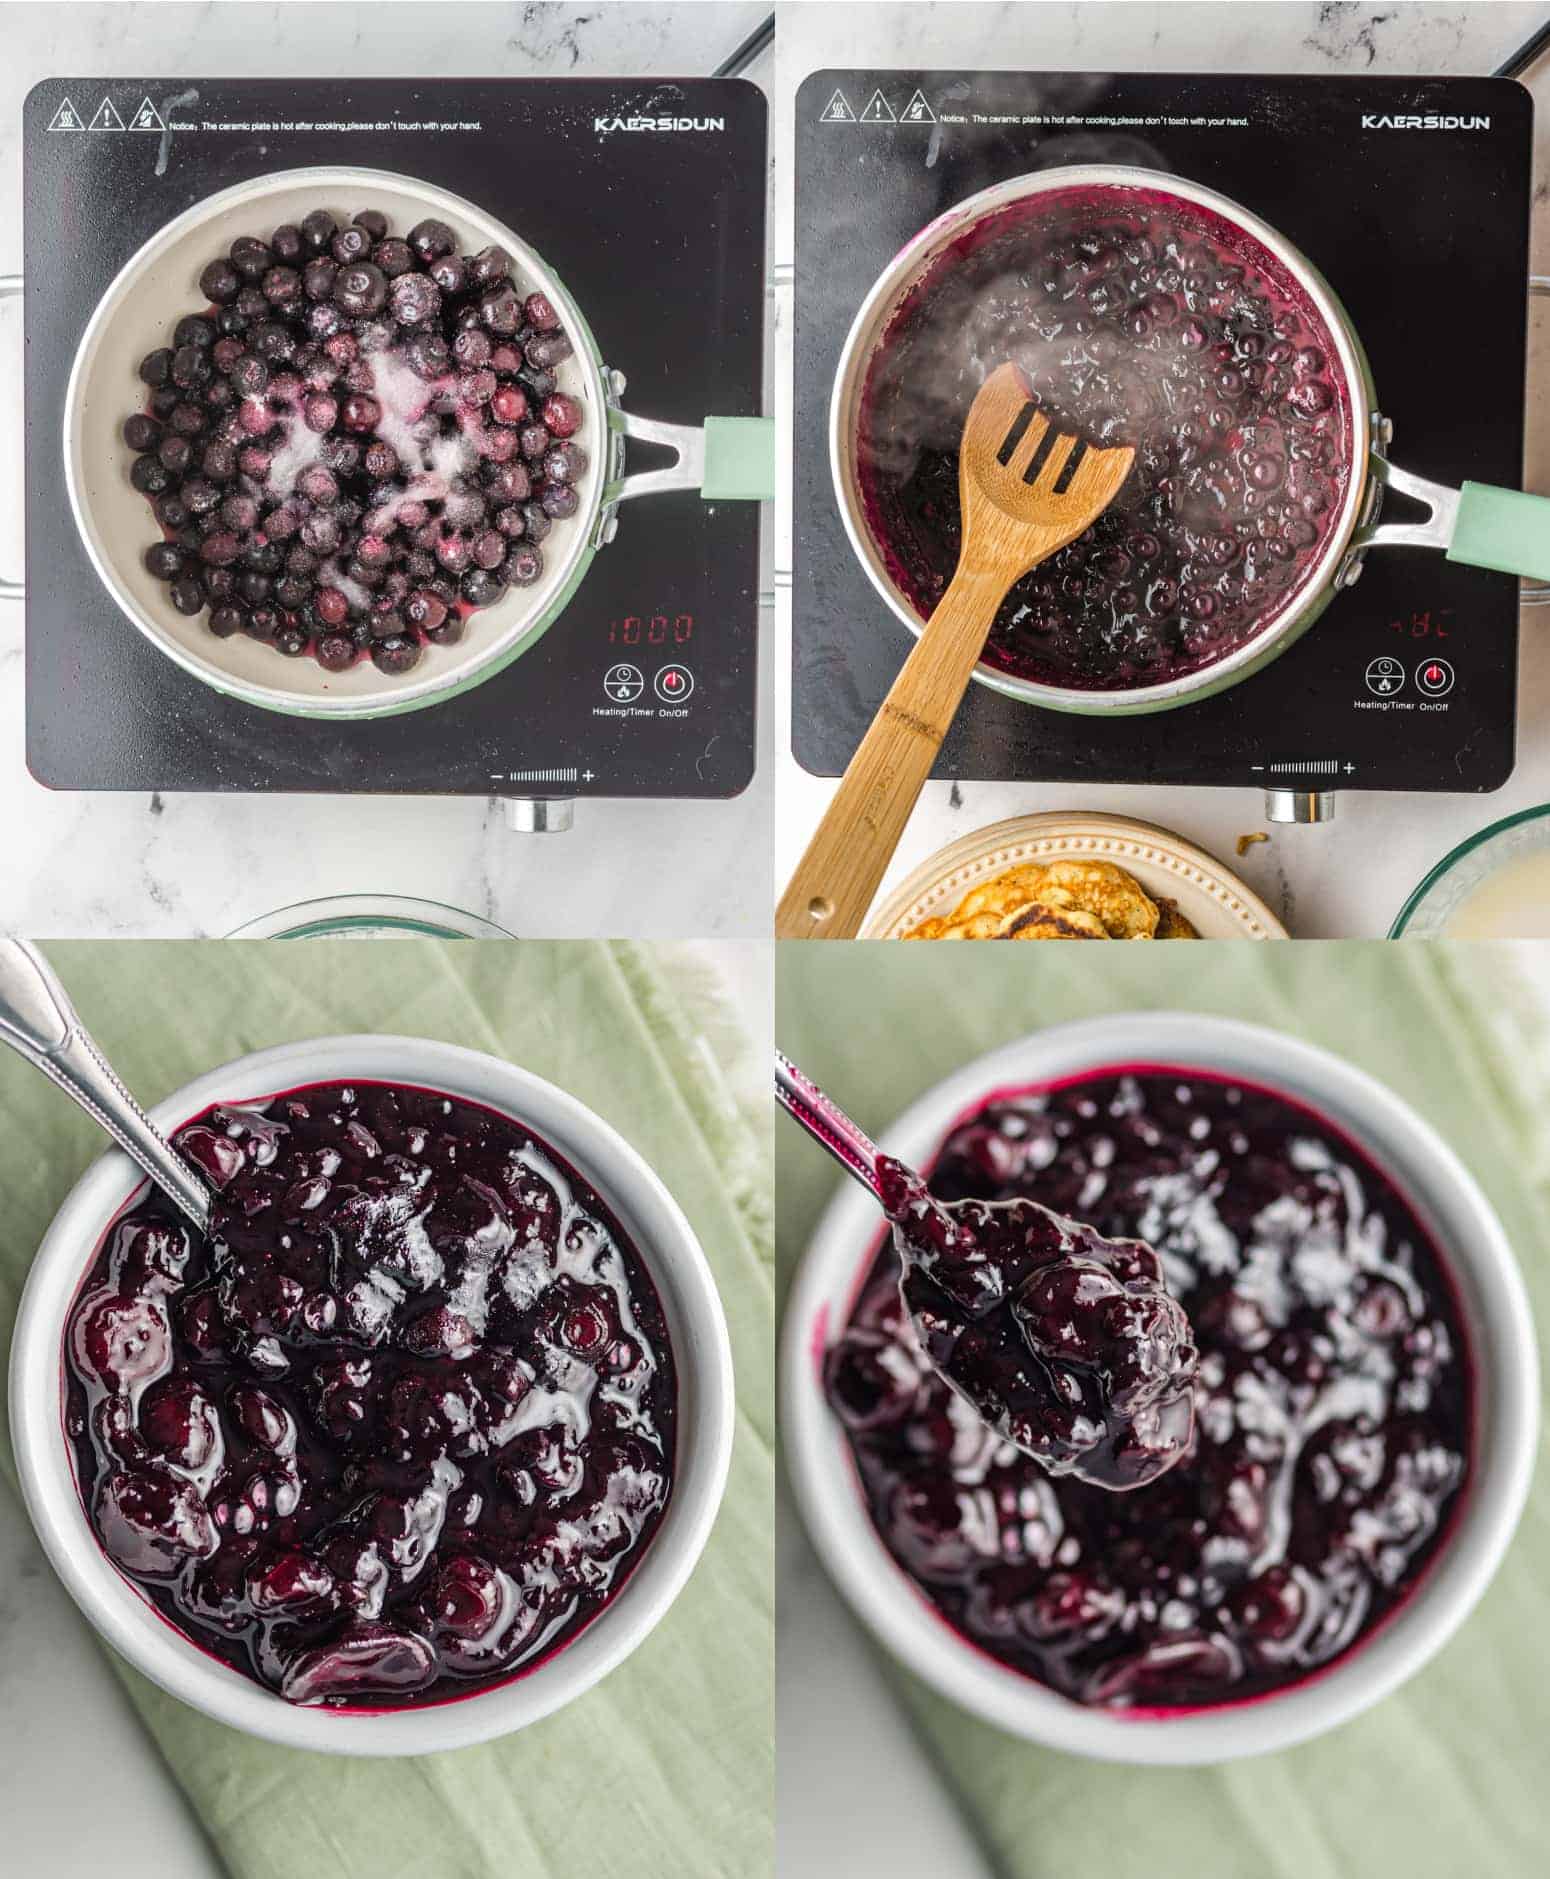 Four process photos. First one, blueberries and sugar added to a saucepan. Second one, blueberries simmering. Third one, blueberry compote in a small white bowl. Fourth one, a spoon picking up a bite of the blueberry compote. 